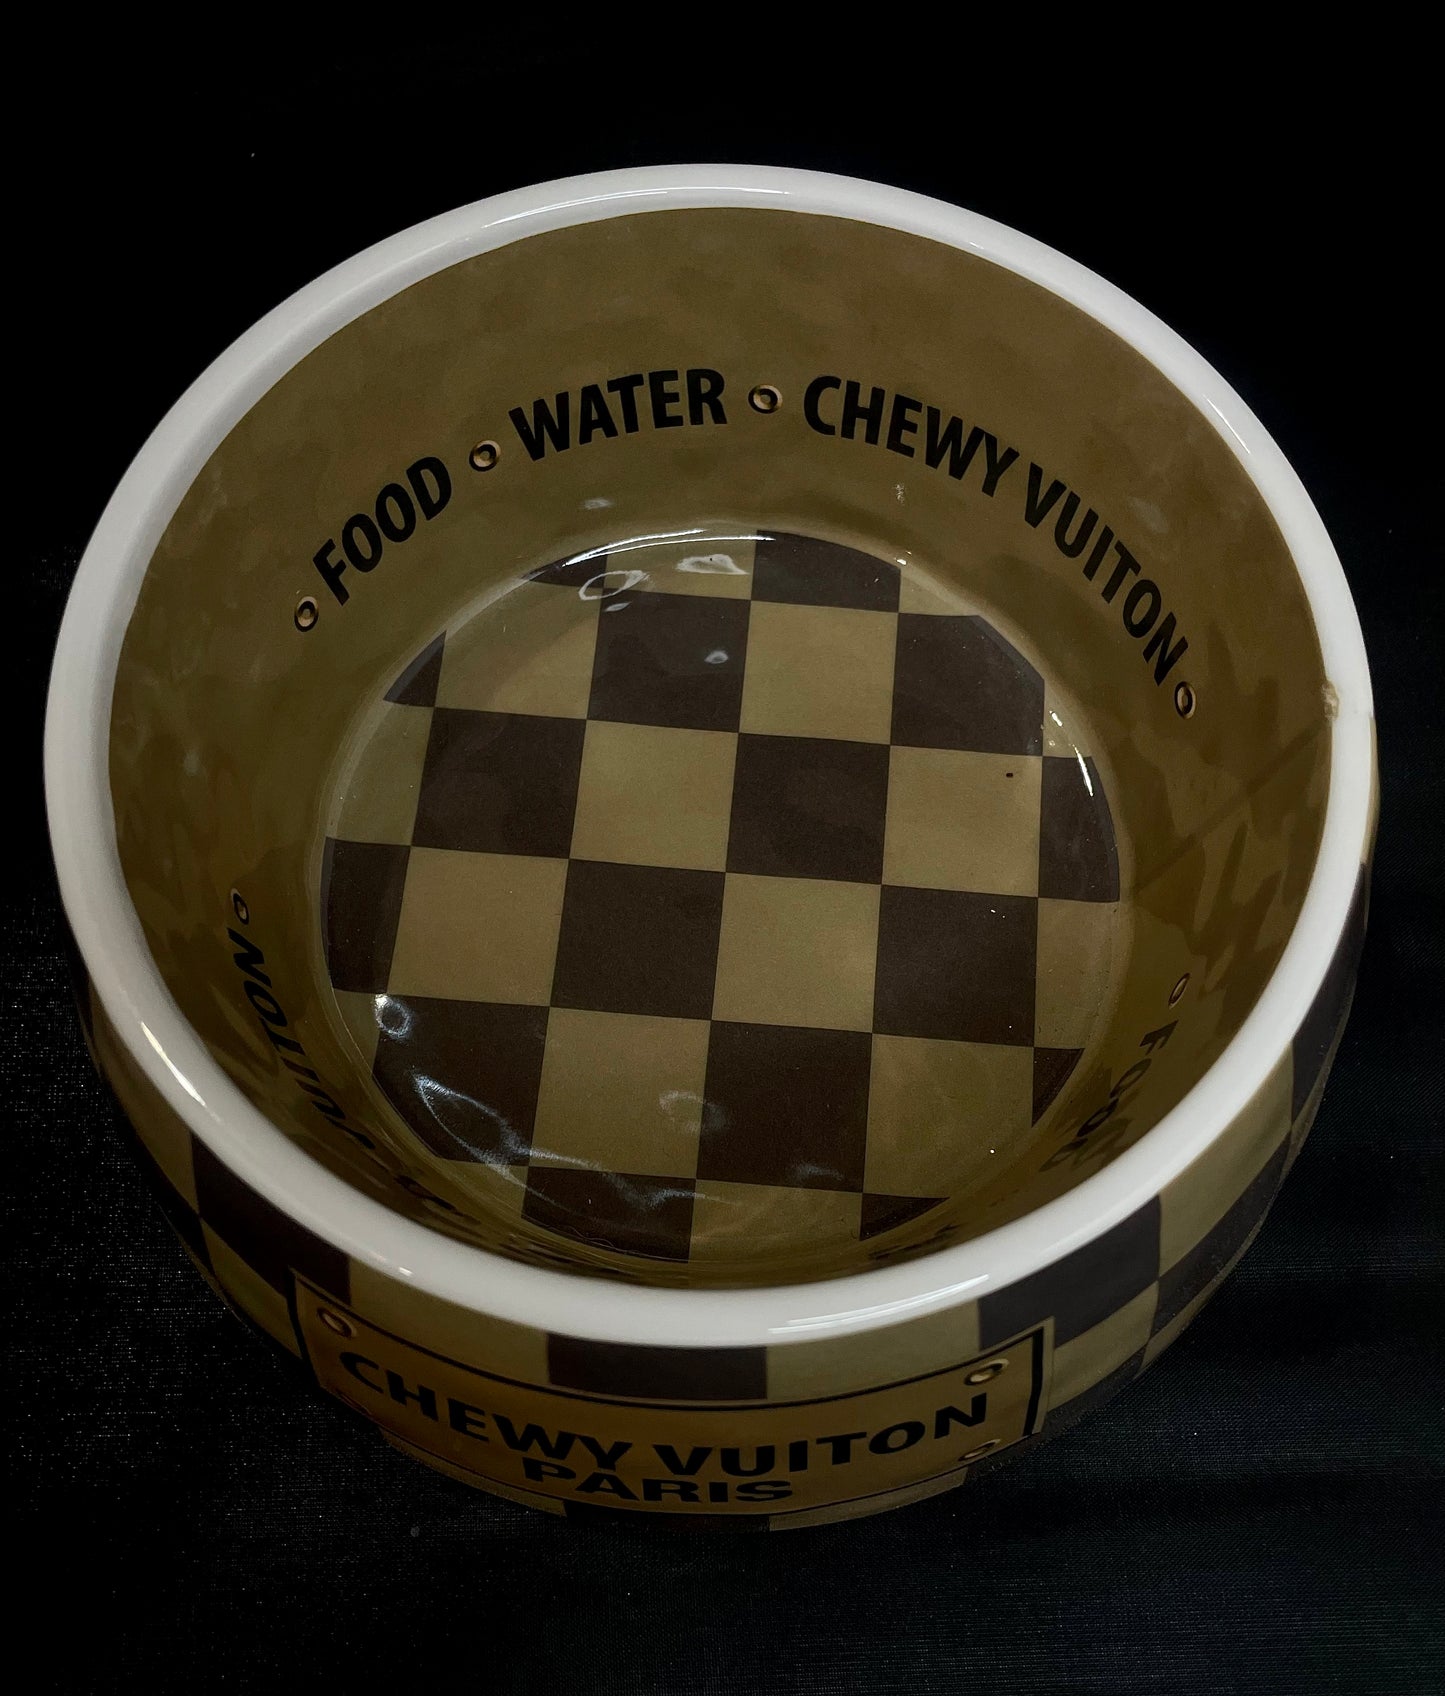 Checkered Chewy Dog Bowl